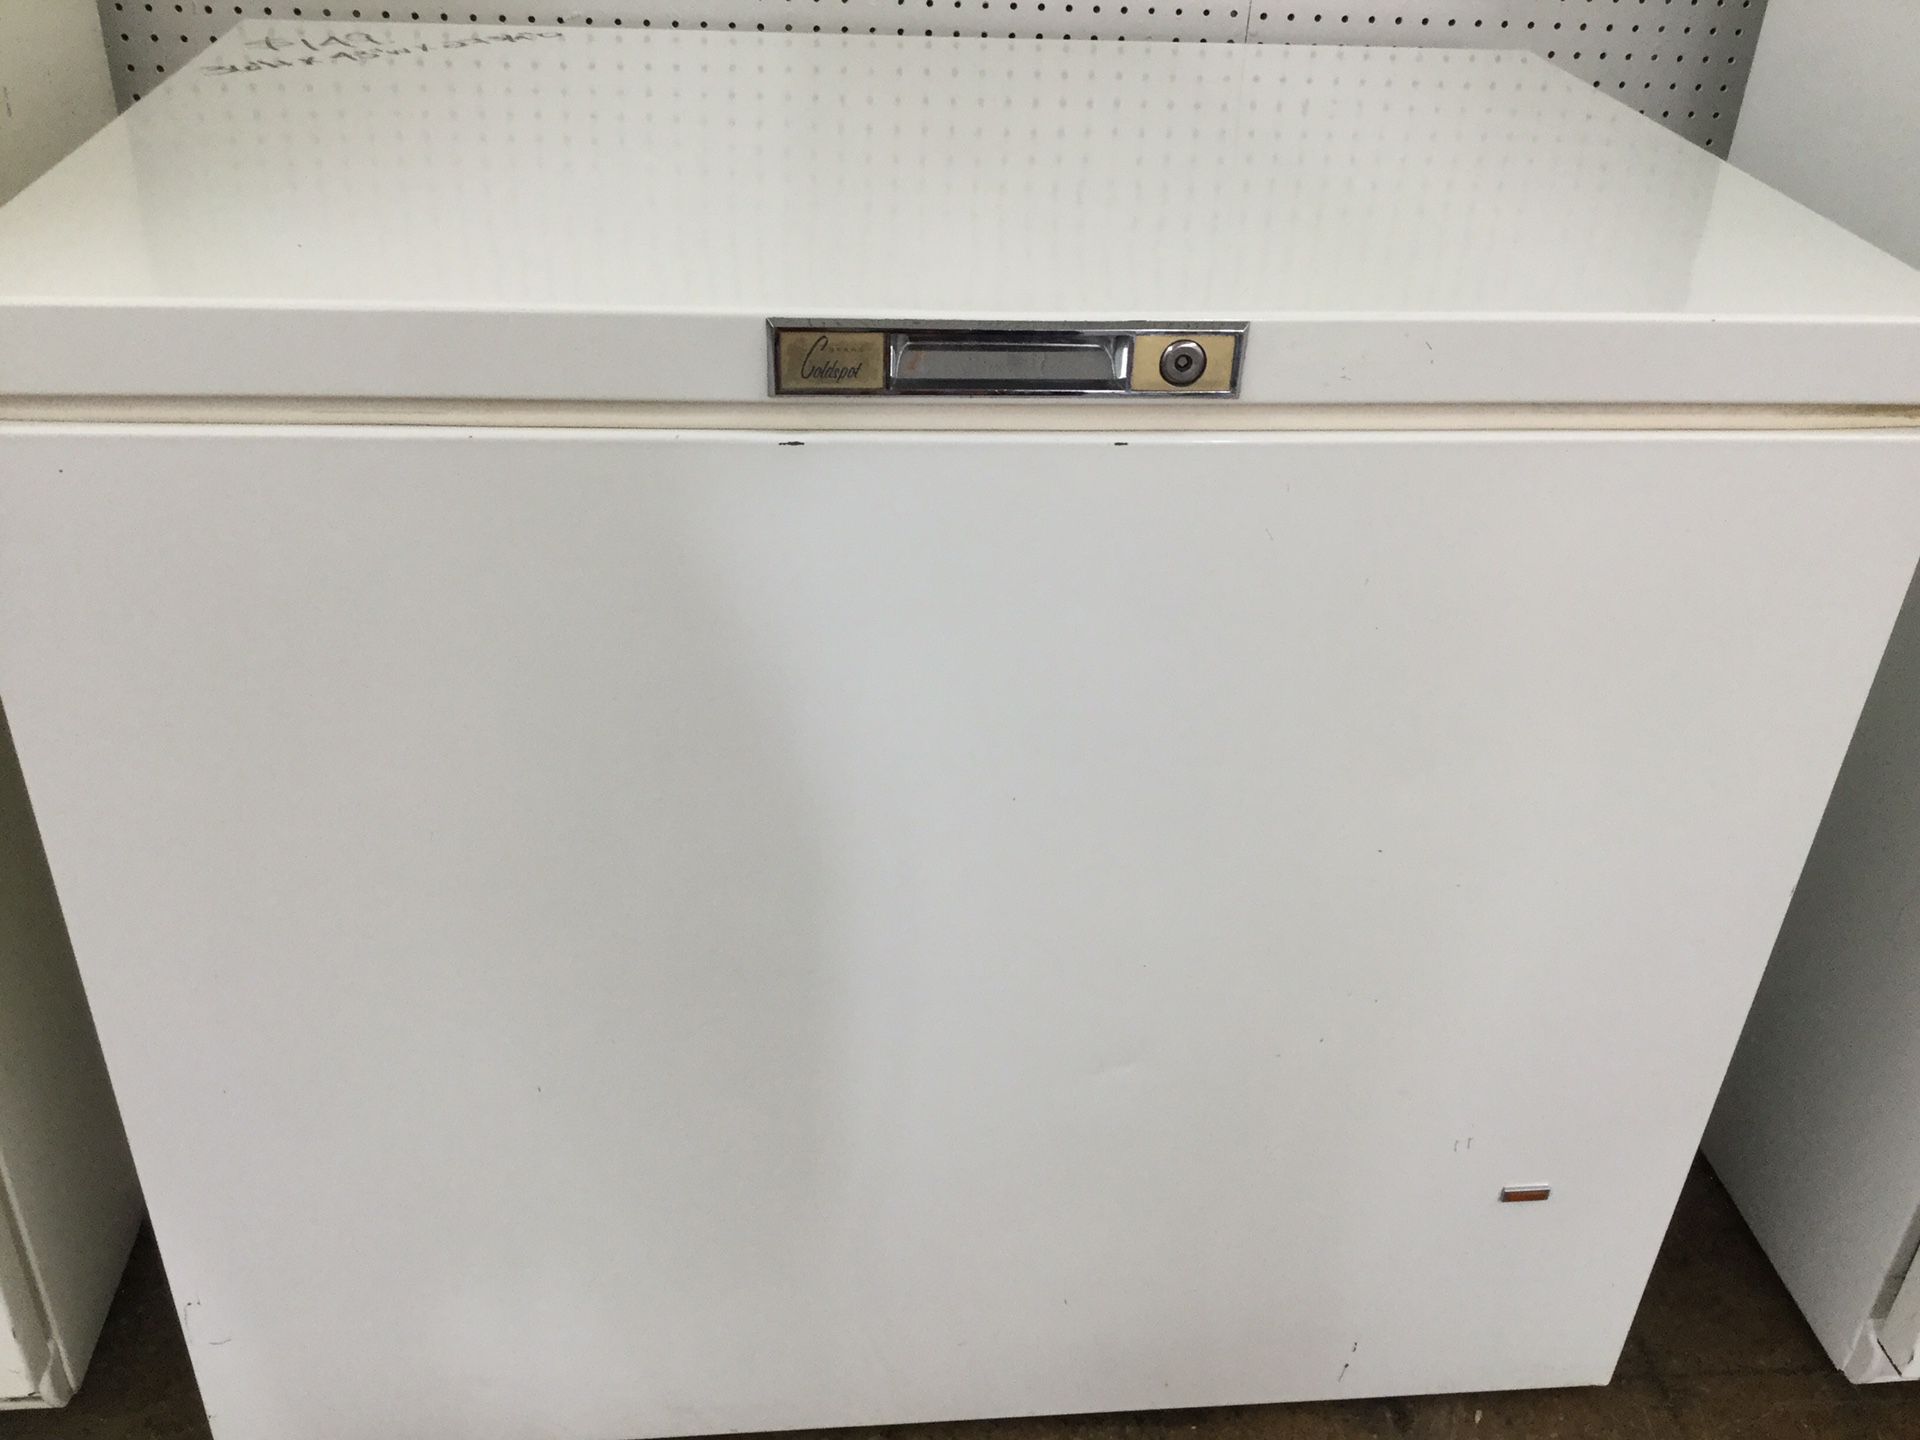 Sears Coldspot Nice Chest Freezer! 15 Cubic Feet! 36” H x 43” W x 27 3/4” D!! Clean! 30-Day Guarantee! We Can Deliver!